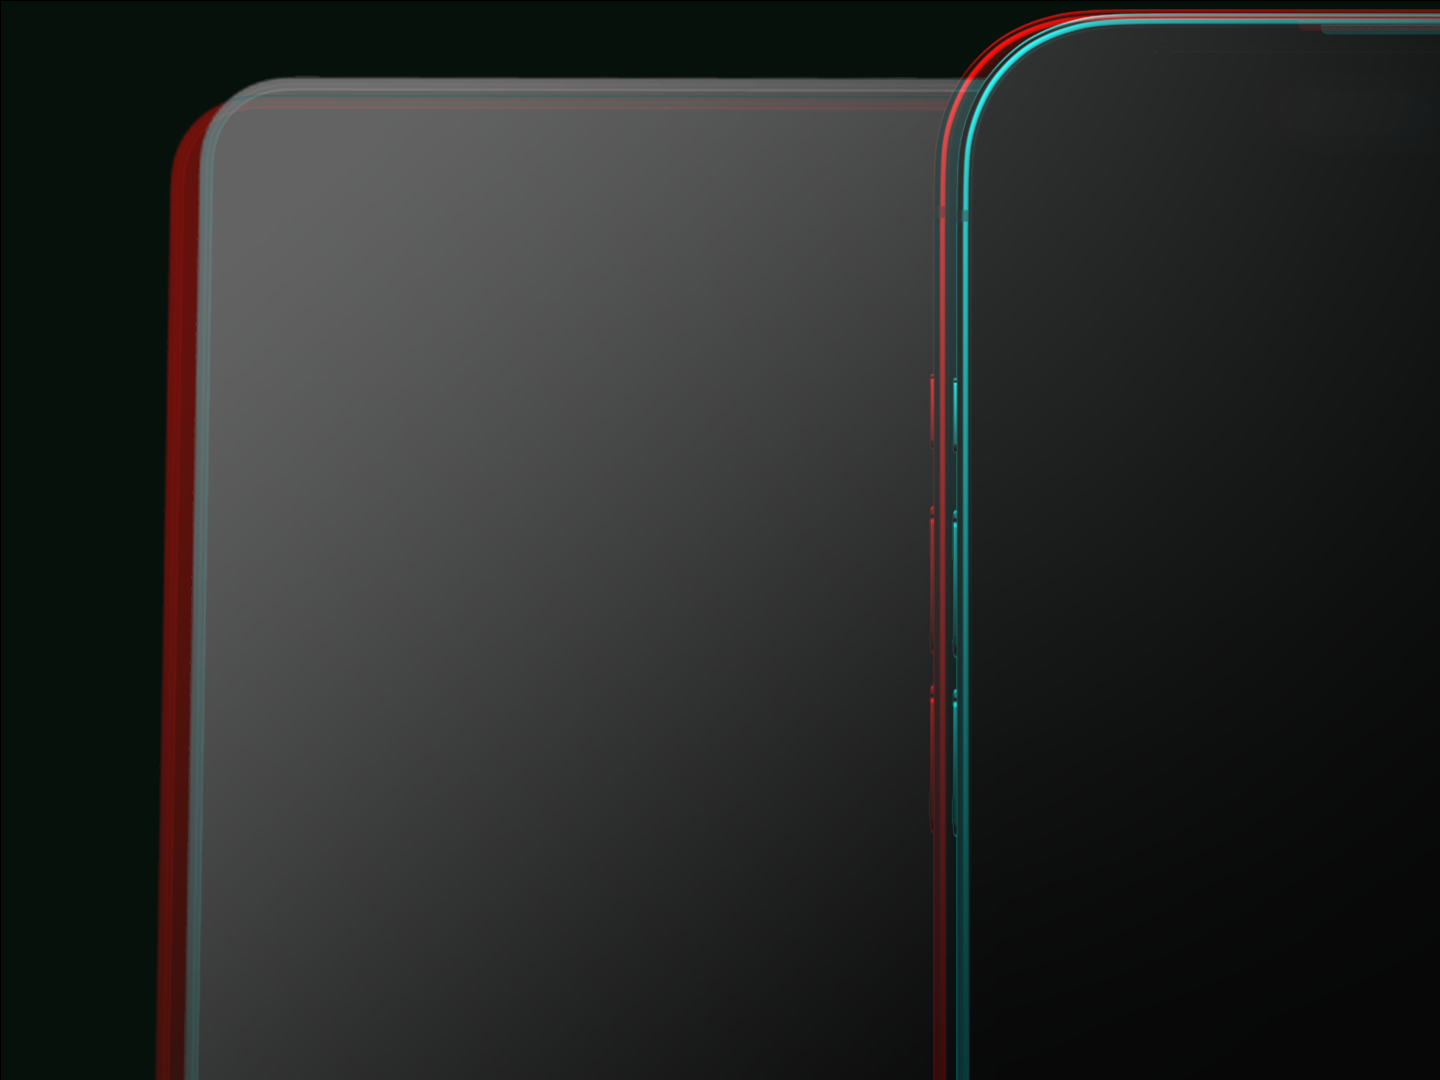 Section of the upper part of mobile and laptop screen with a glitch effect making the outline blue and red.